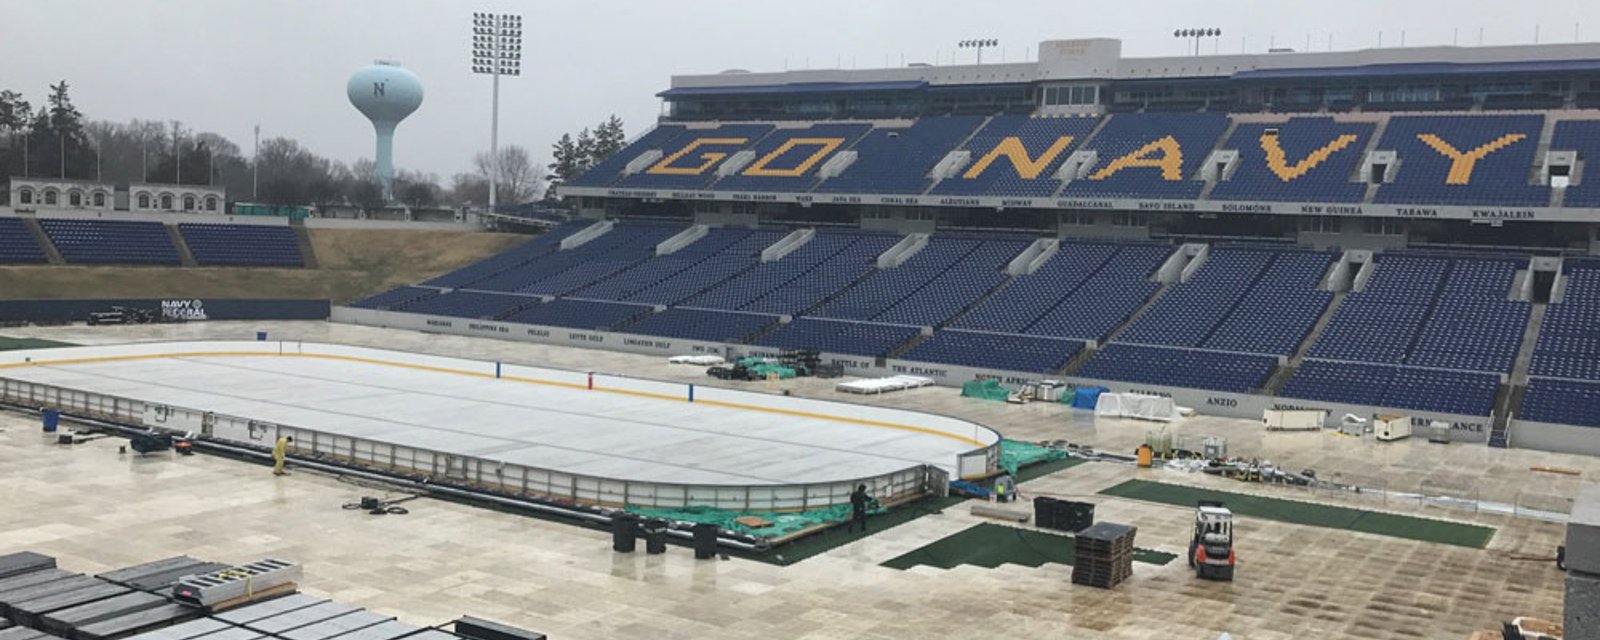 Breaking: There is a huge issue with tonight's outdoor game